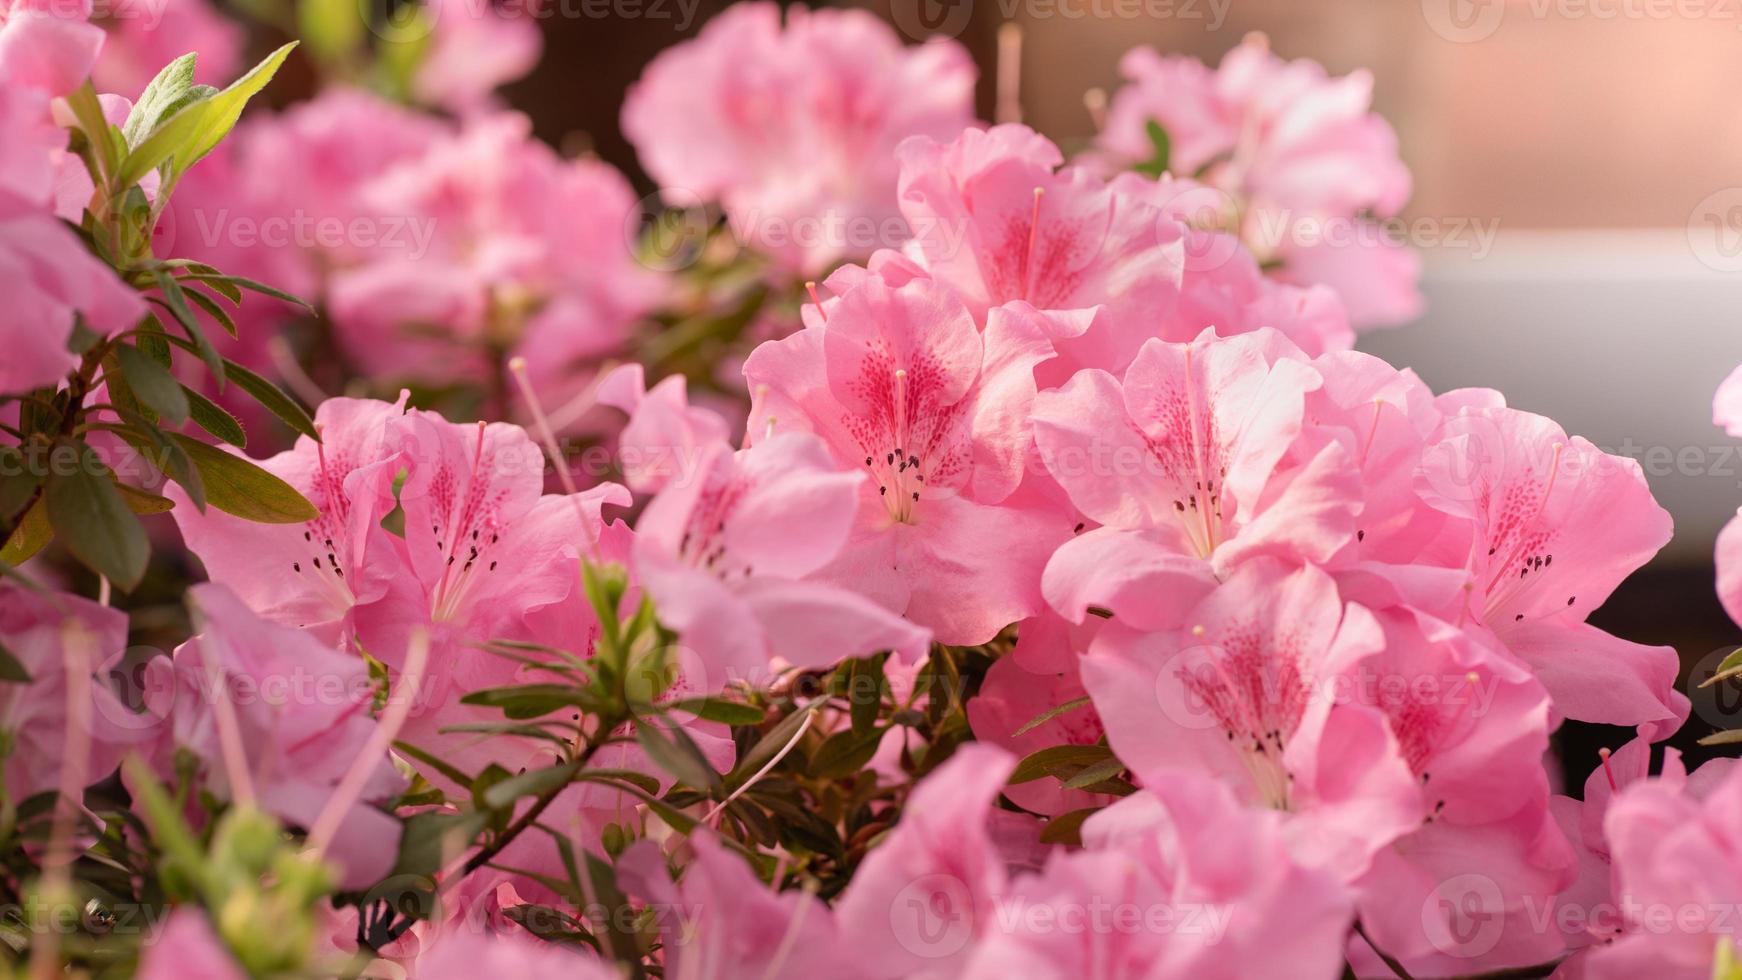 Flowers bloom azaleas, pink rhododendron buds on a green background, long banner photo